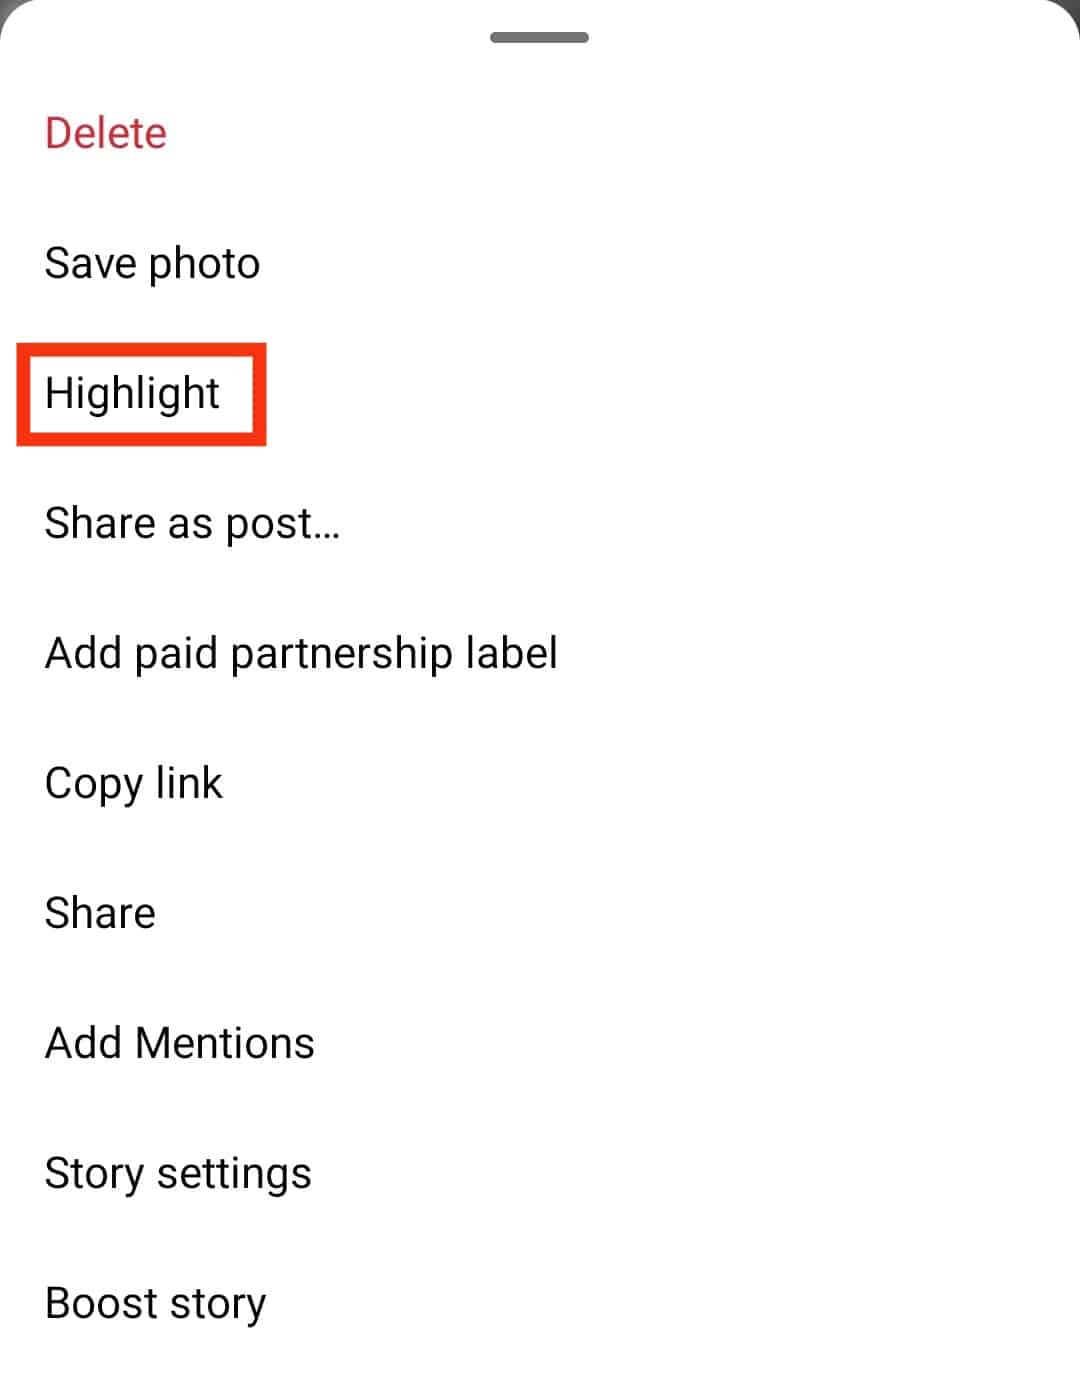 Tap On The Highlight Option